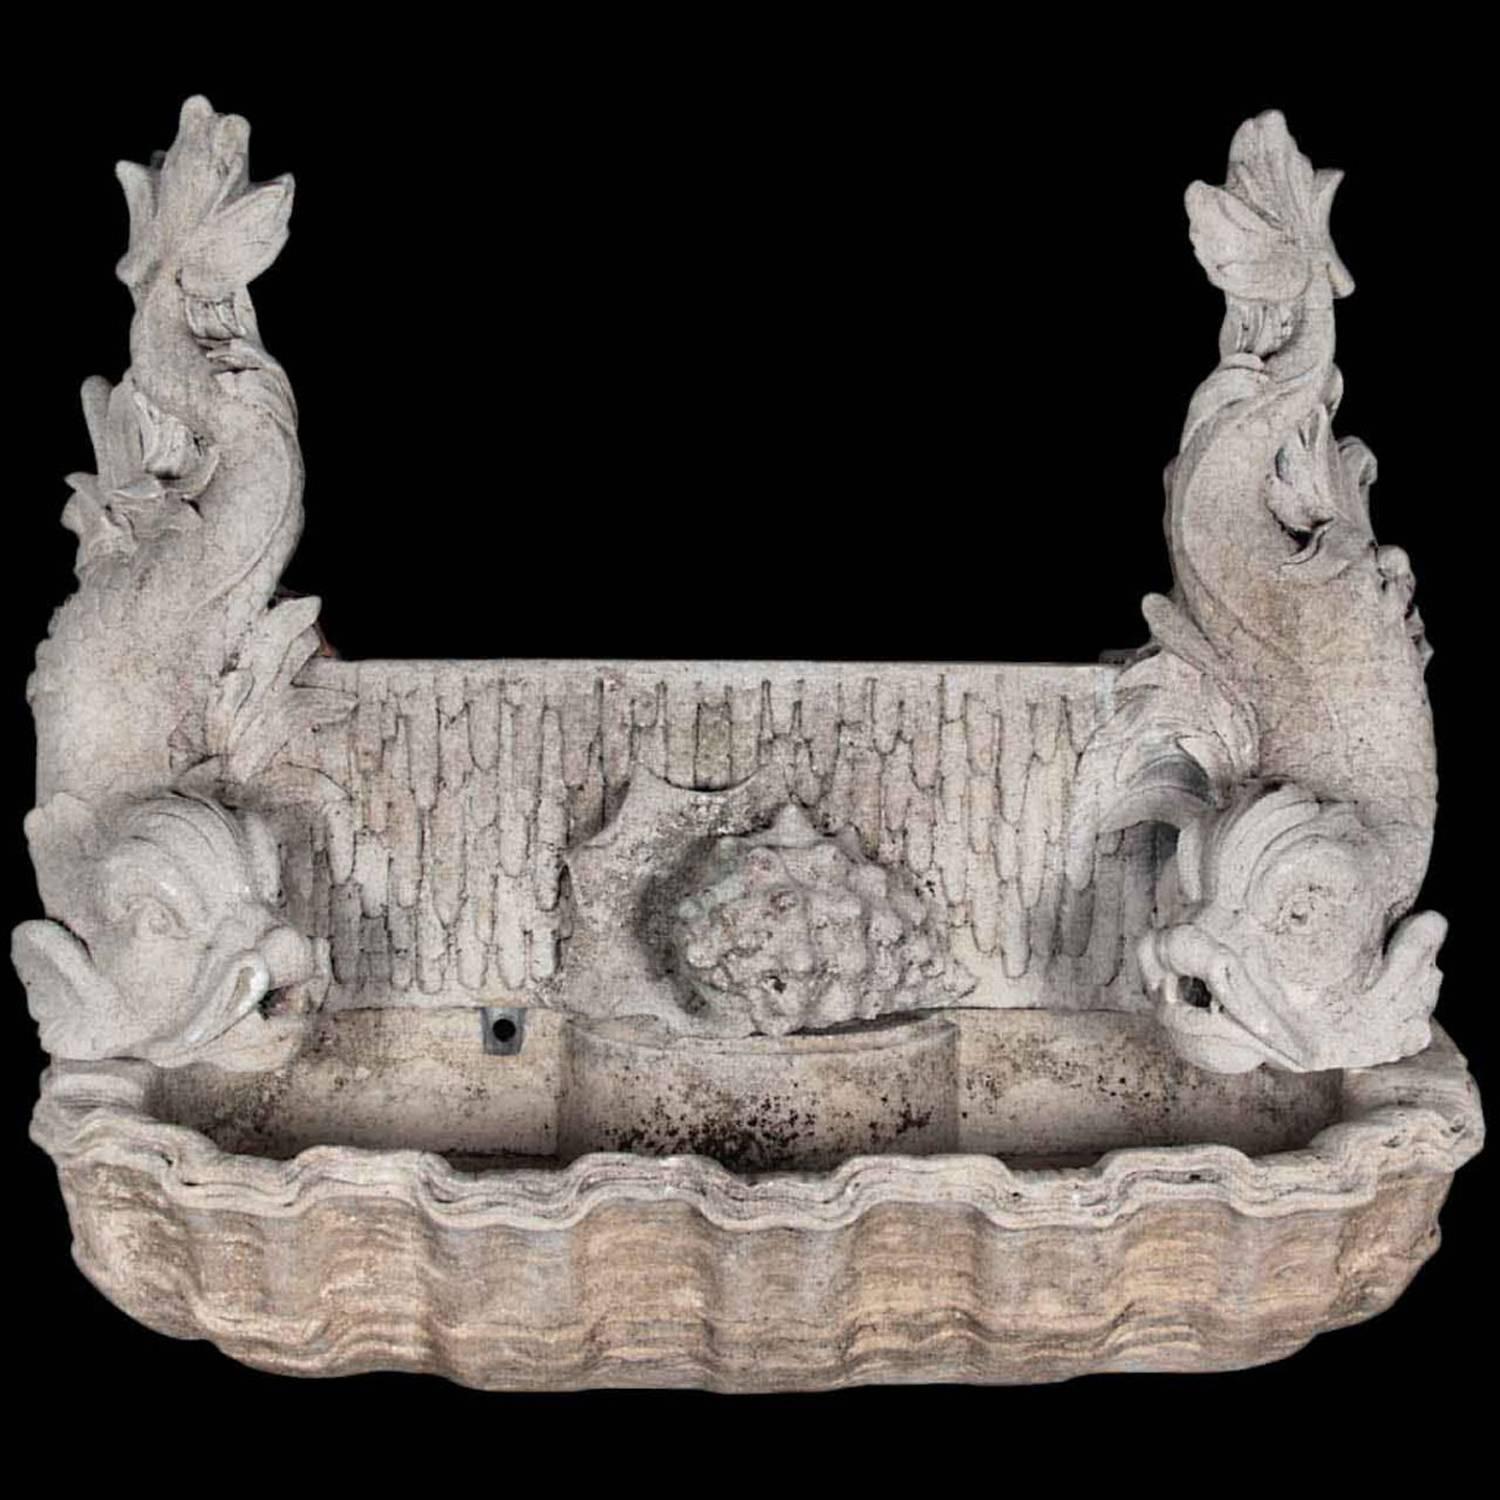 Italian, turn of the century, hand carved limestone fountain. A pair of exceptionally carved dolphins flanking a conch shell sit atop a stylized shell basin. Two water feeds are already in place terminating at the mouth of each dolphin and the water